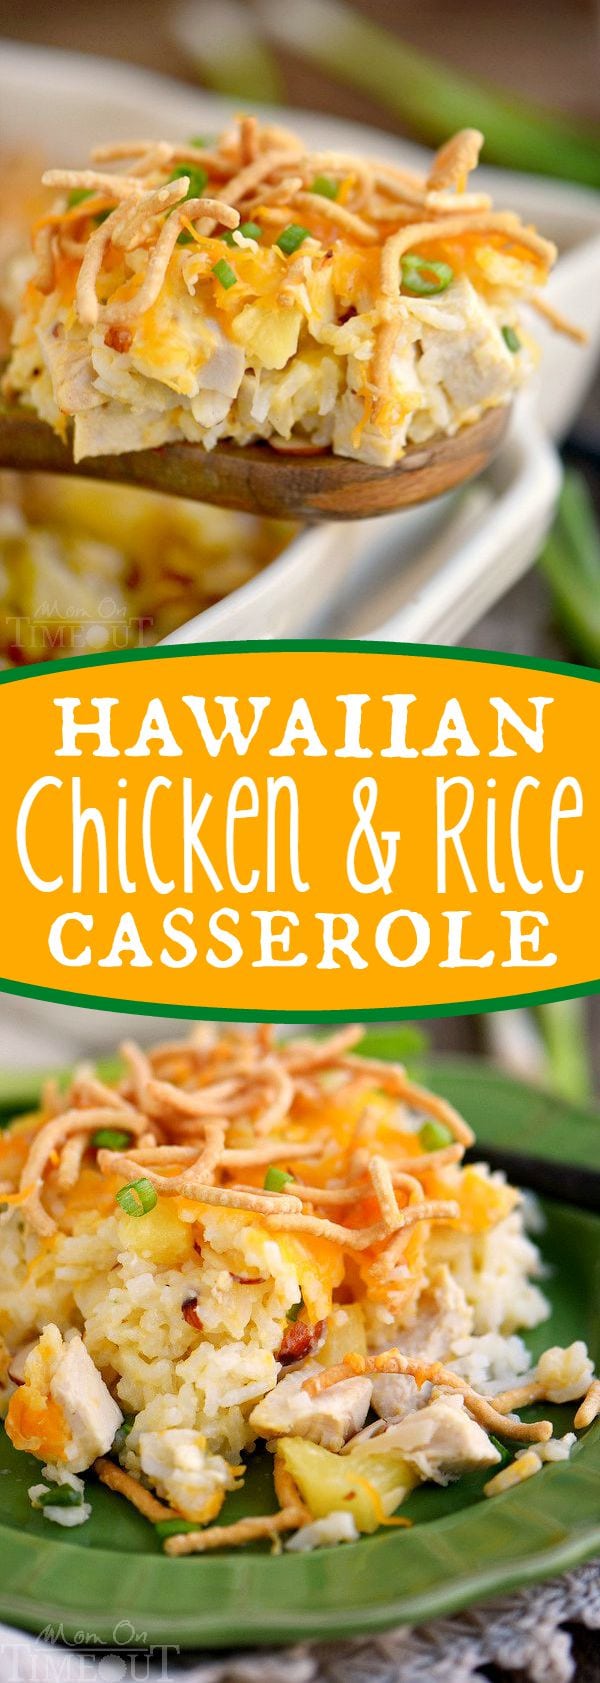 Get ready for a new favorite recipe - Hawaiian Chicken and Rice Casserole! An easy weeknight dinner that uses ingredients you probably already have in your pantry! 